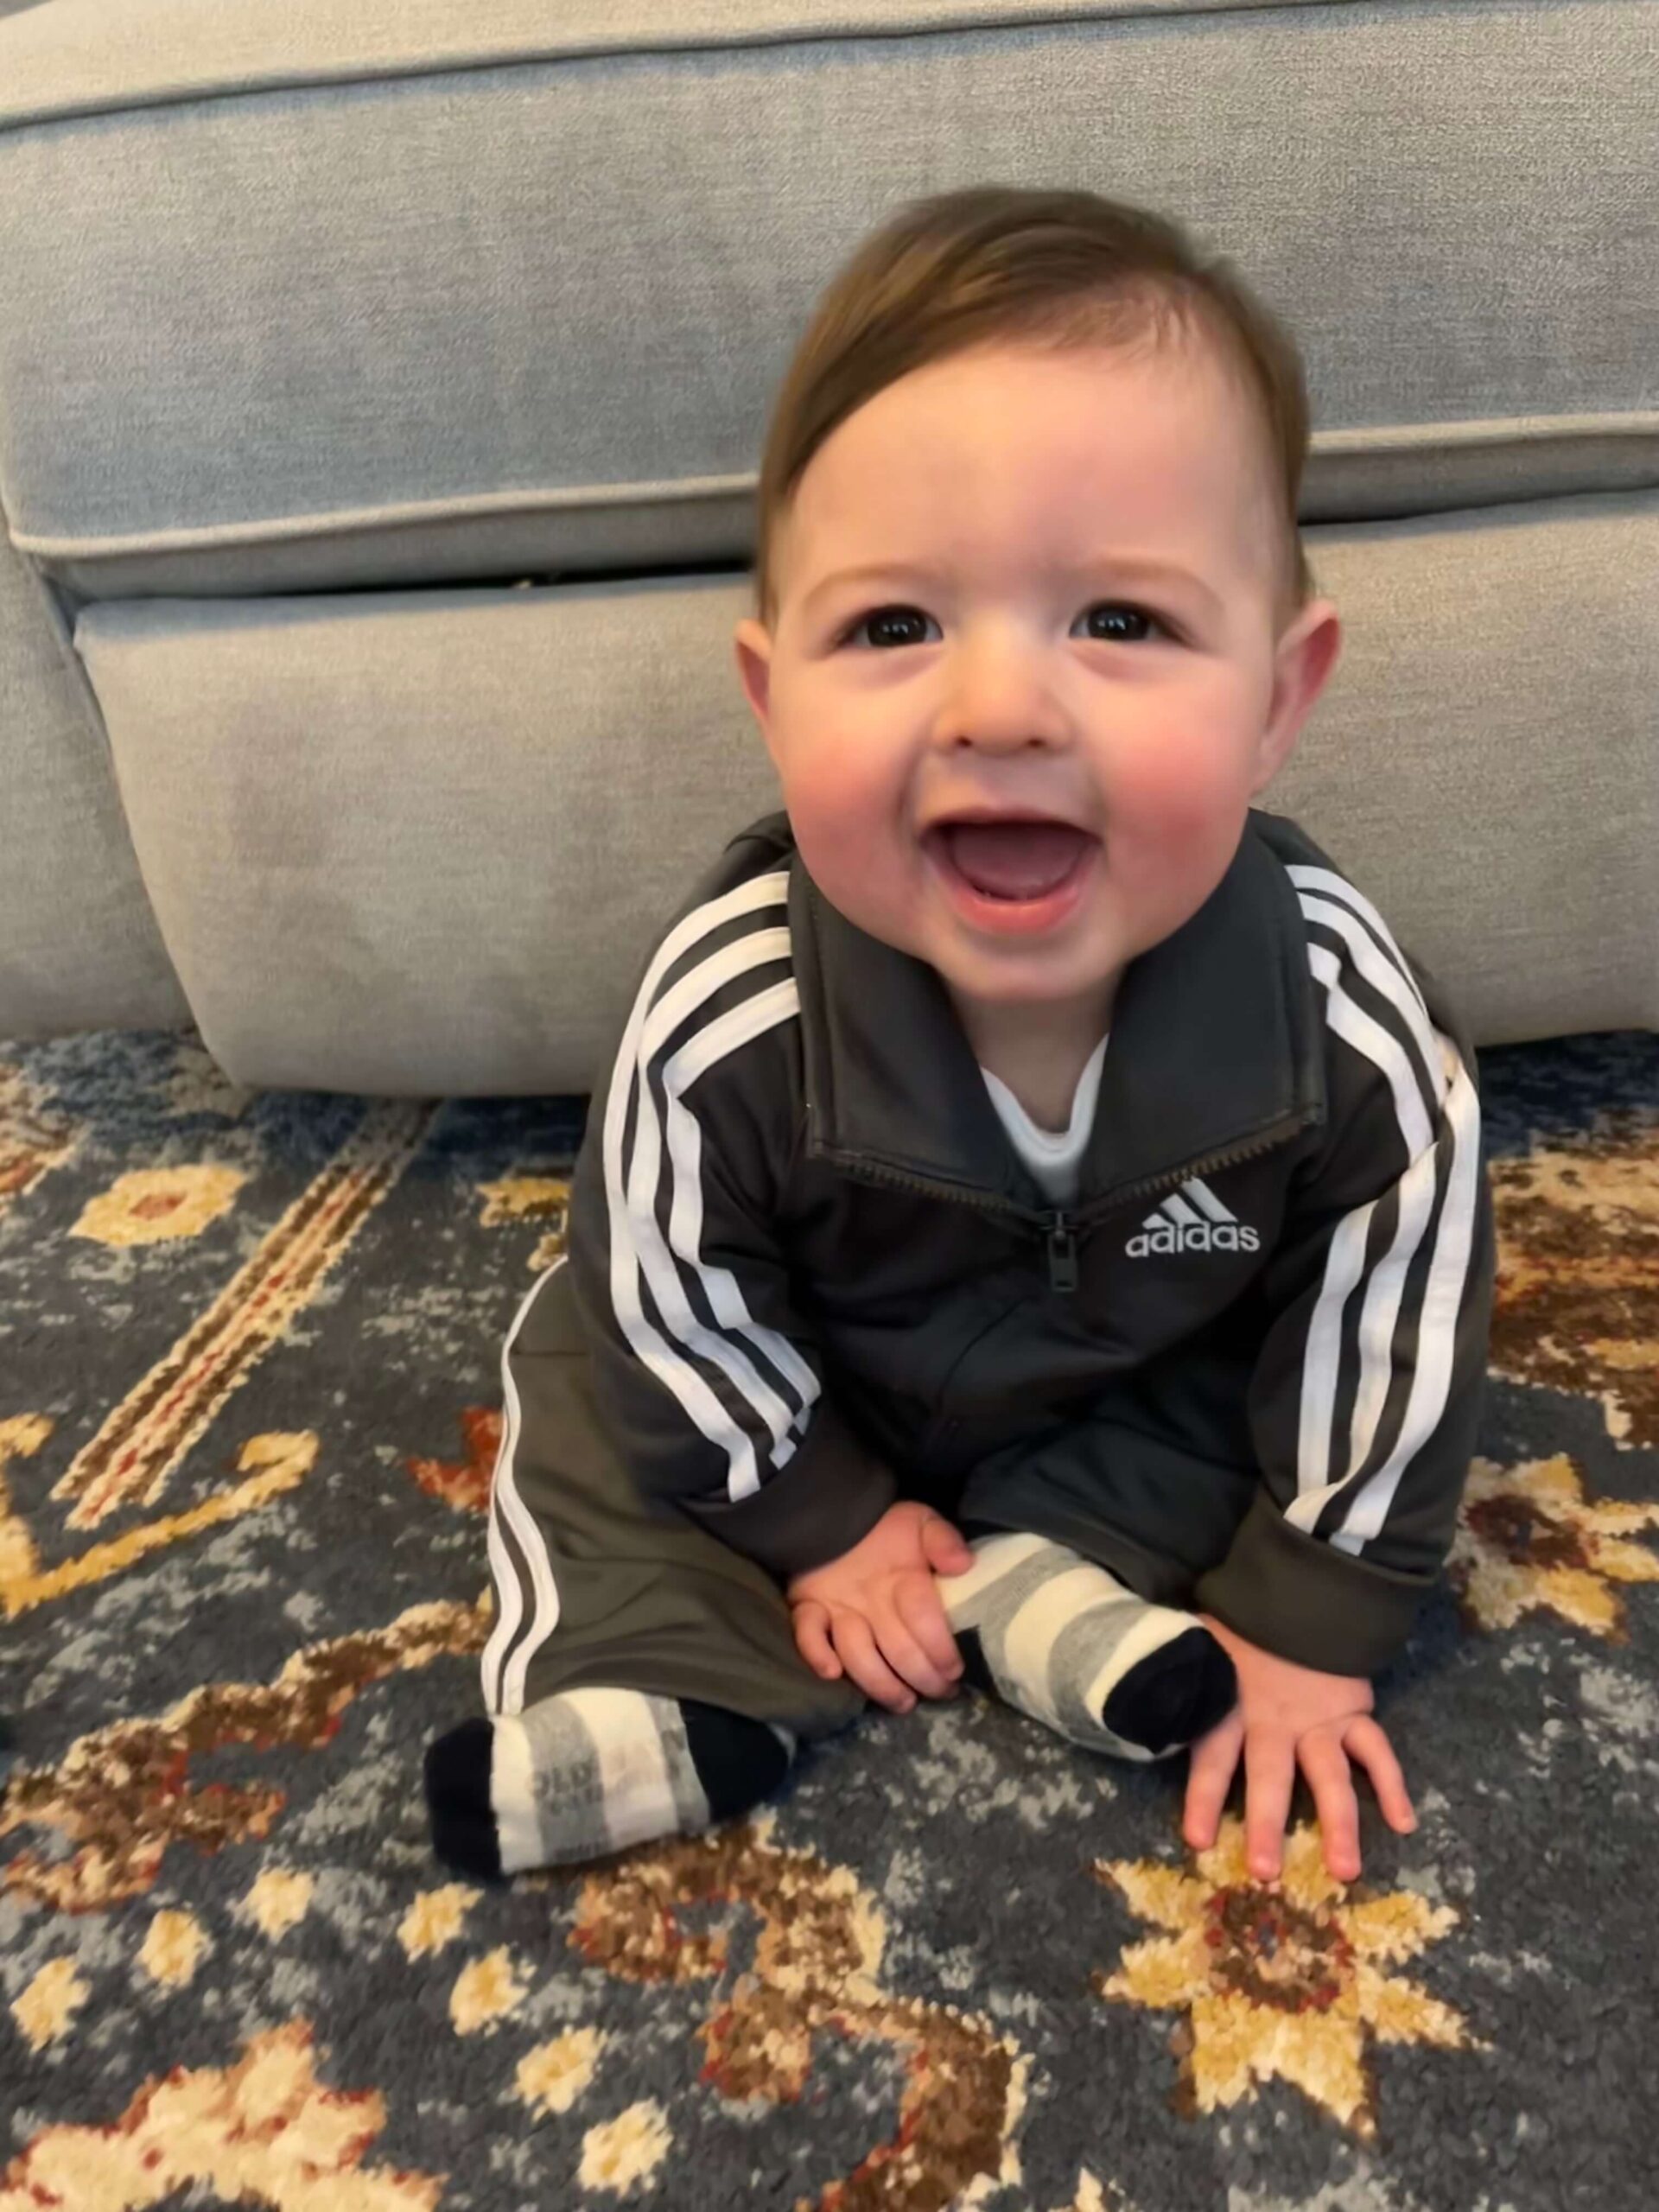 Commissioners Grandson number 2 an Adidas boy - 4/22